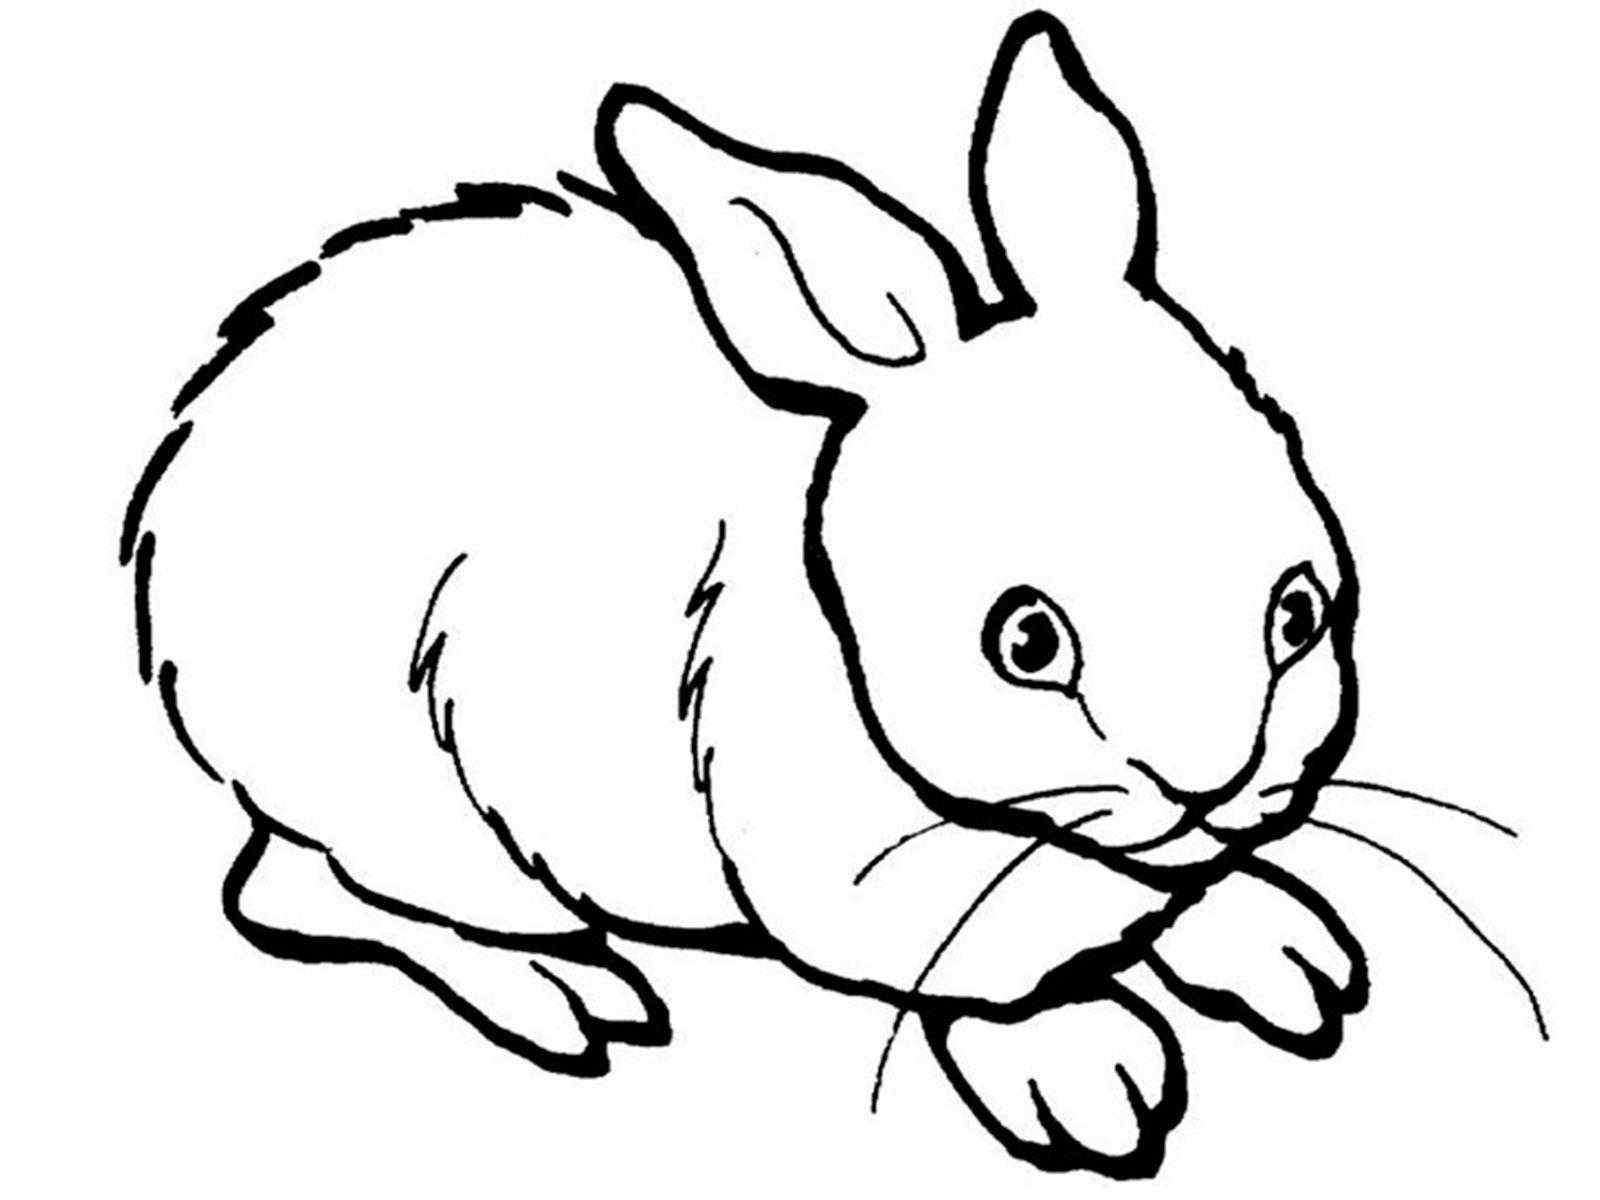 Coloring Hare. Category Pets allowed. Tags:  hare.